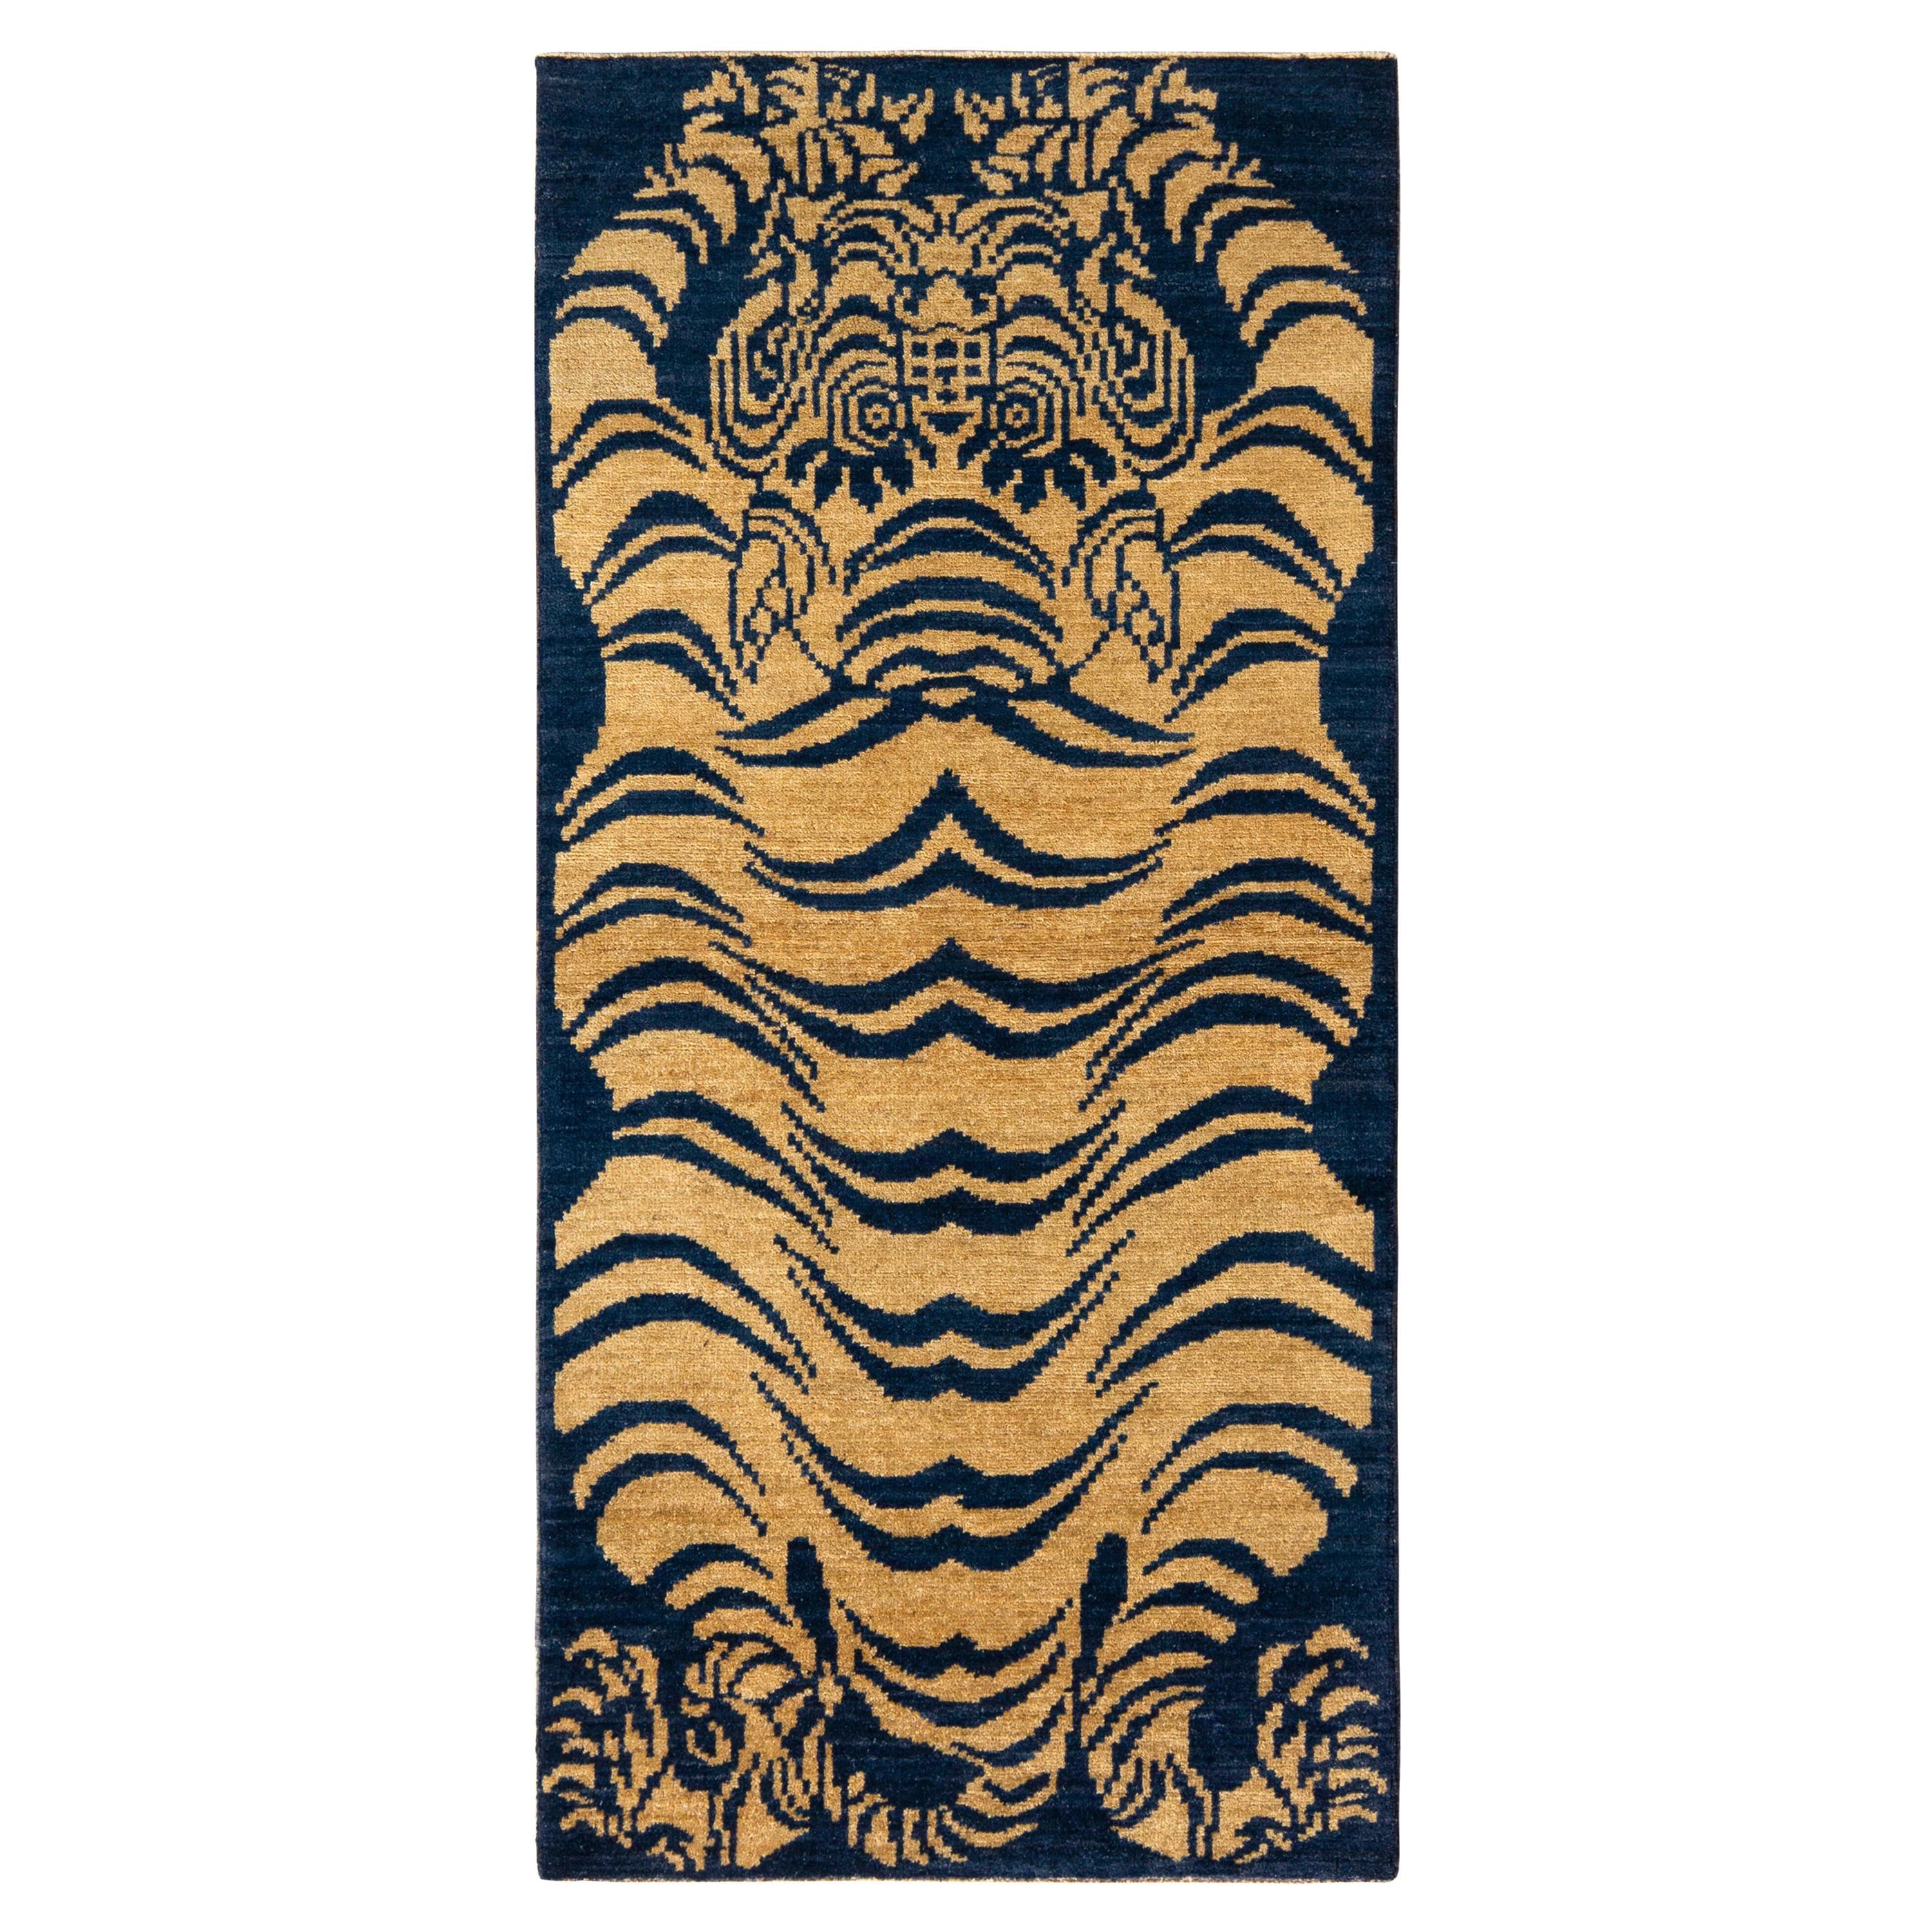 Rug & Kilim’s Classic Style Tiger Rug in Gold and Blue All over Pattern